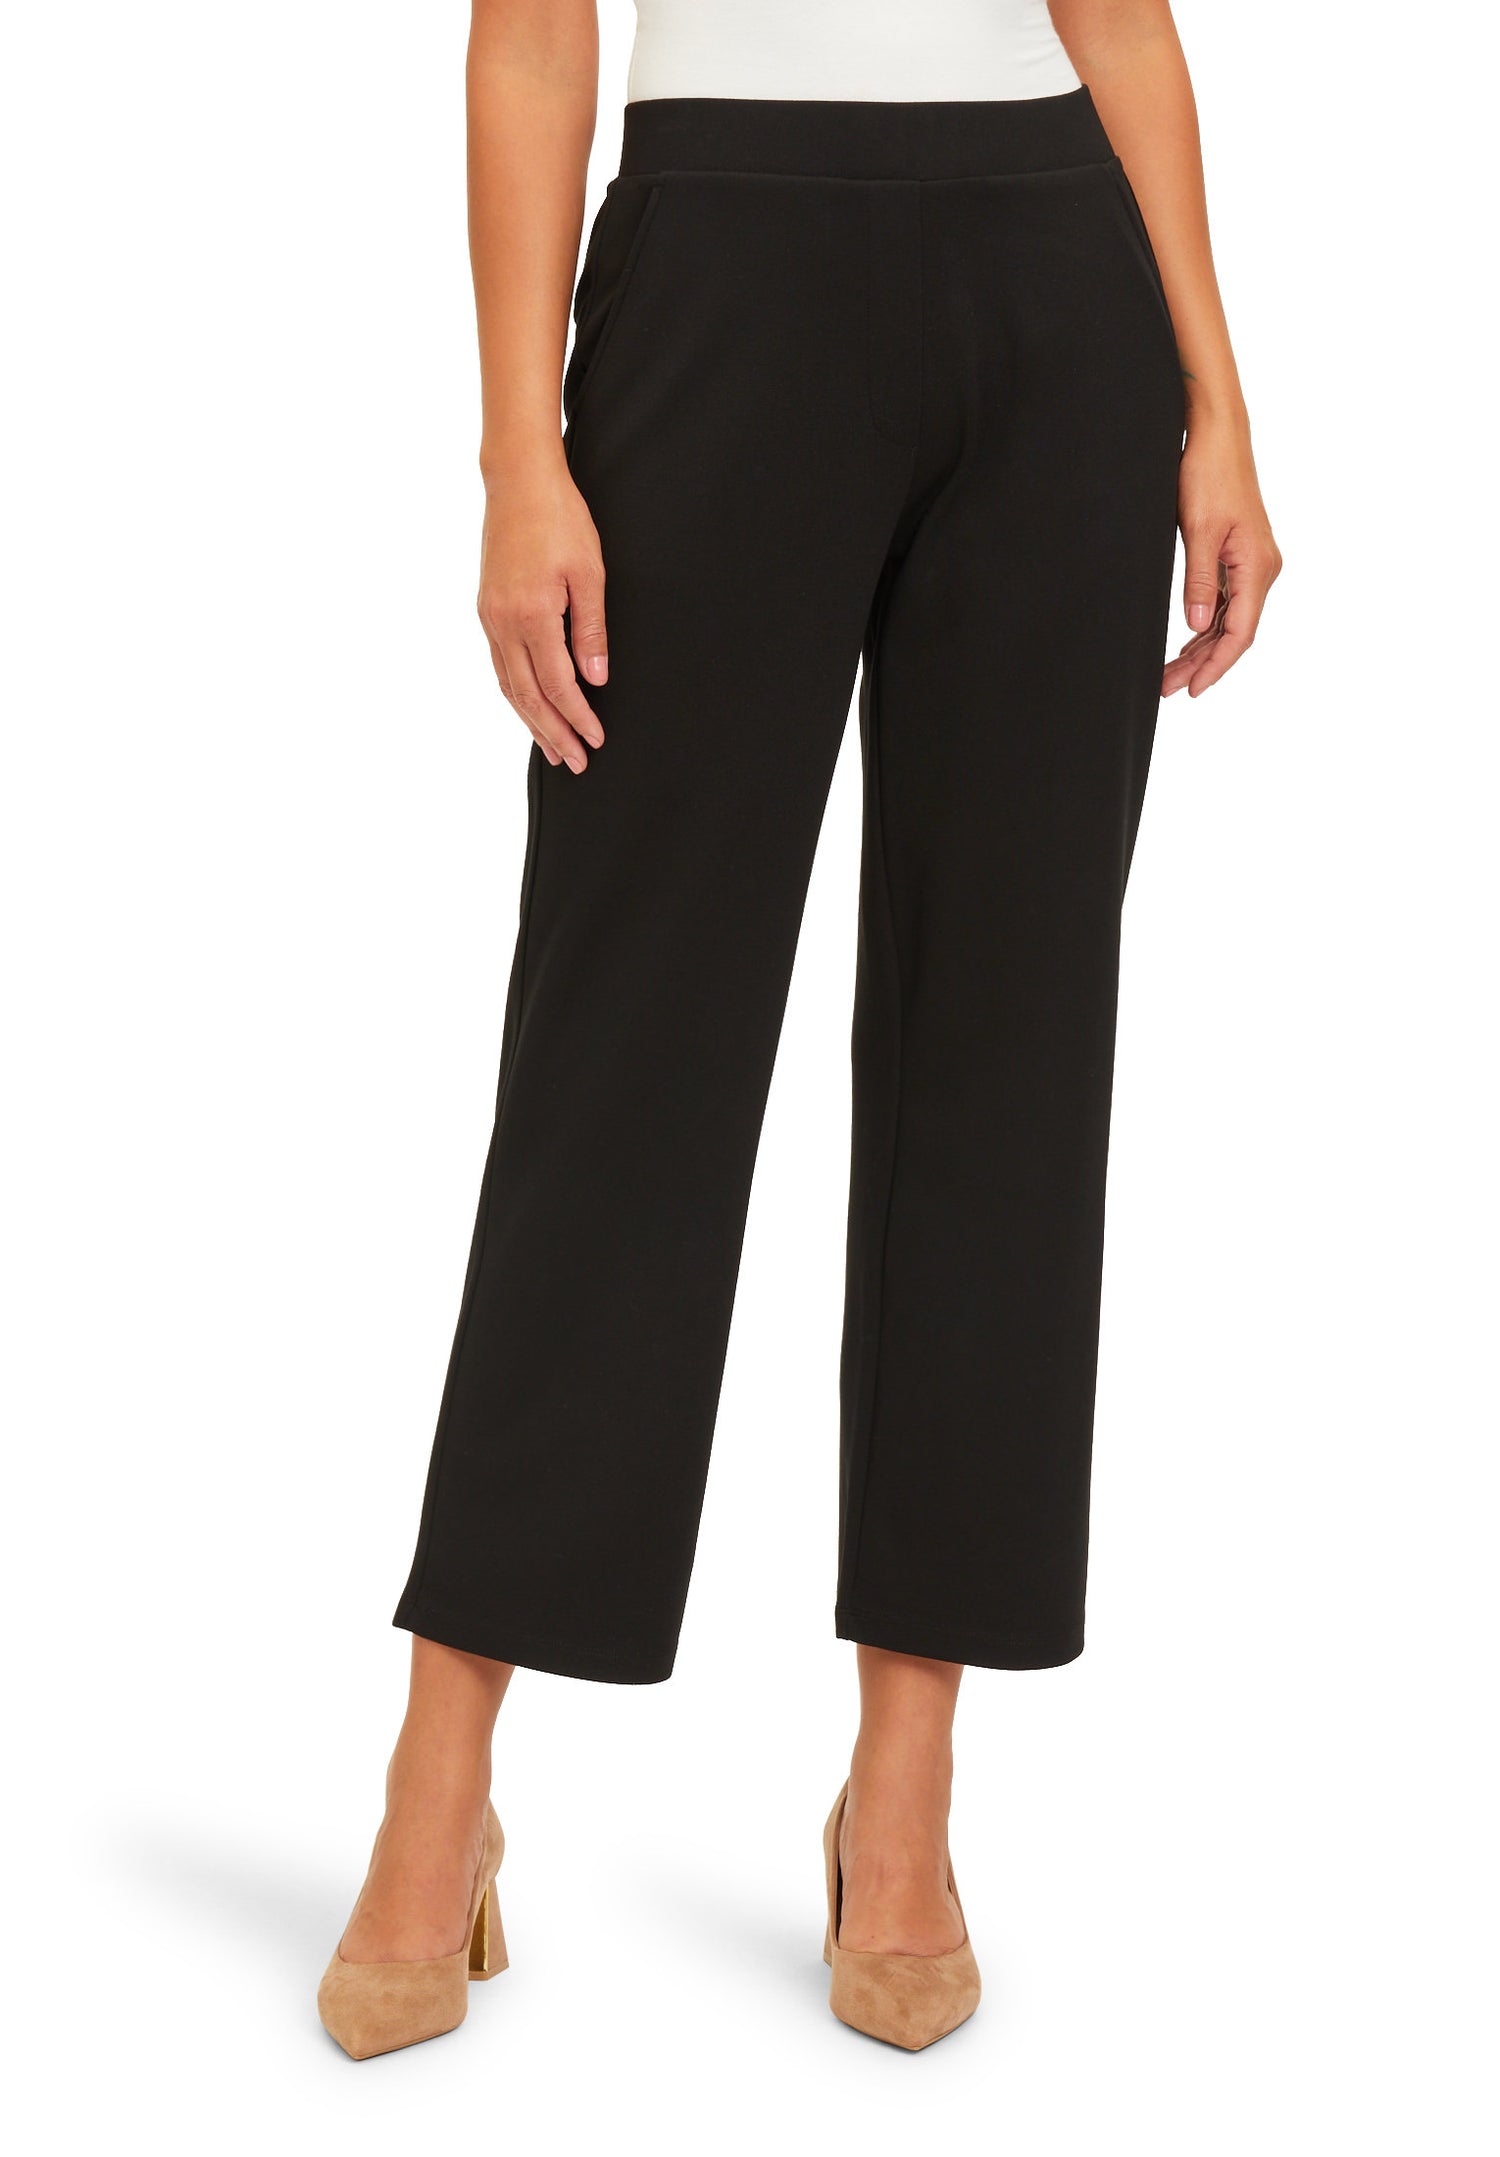 Black Cropped Slip On Trousers_6822-2250_9045_03